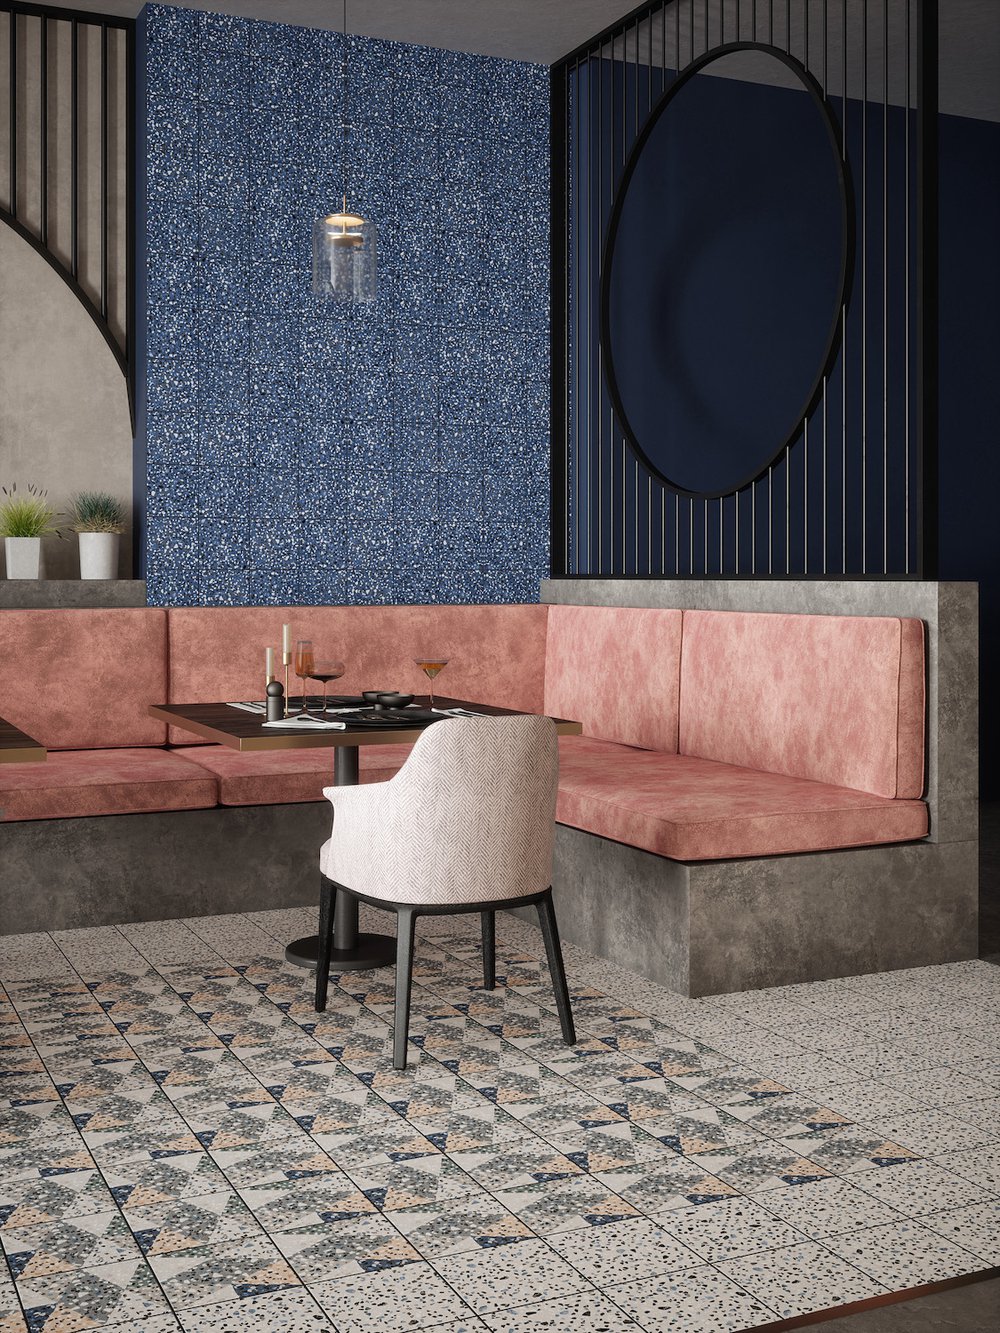 Bold in design and colour, Lucca provides a contemporary take on traditional terrazzo tiles.